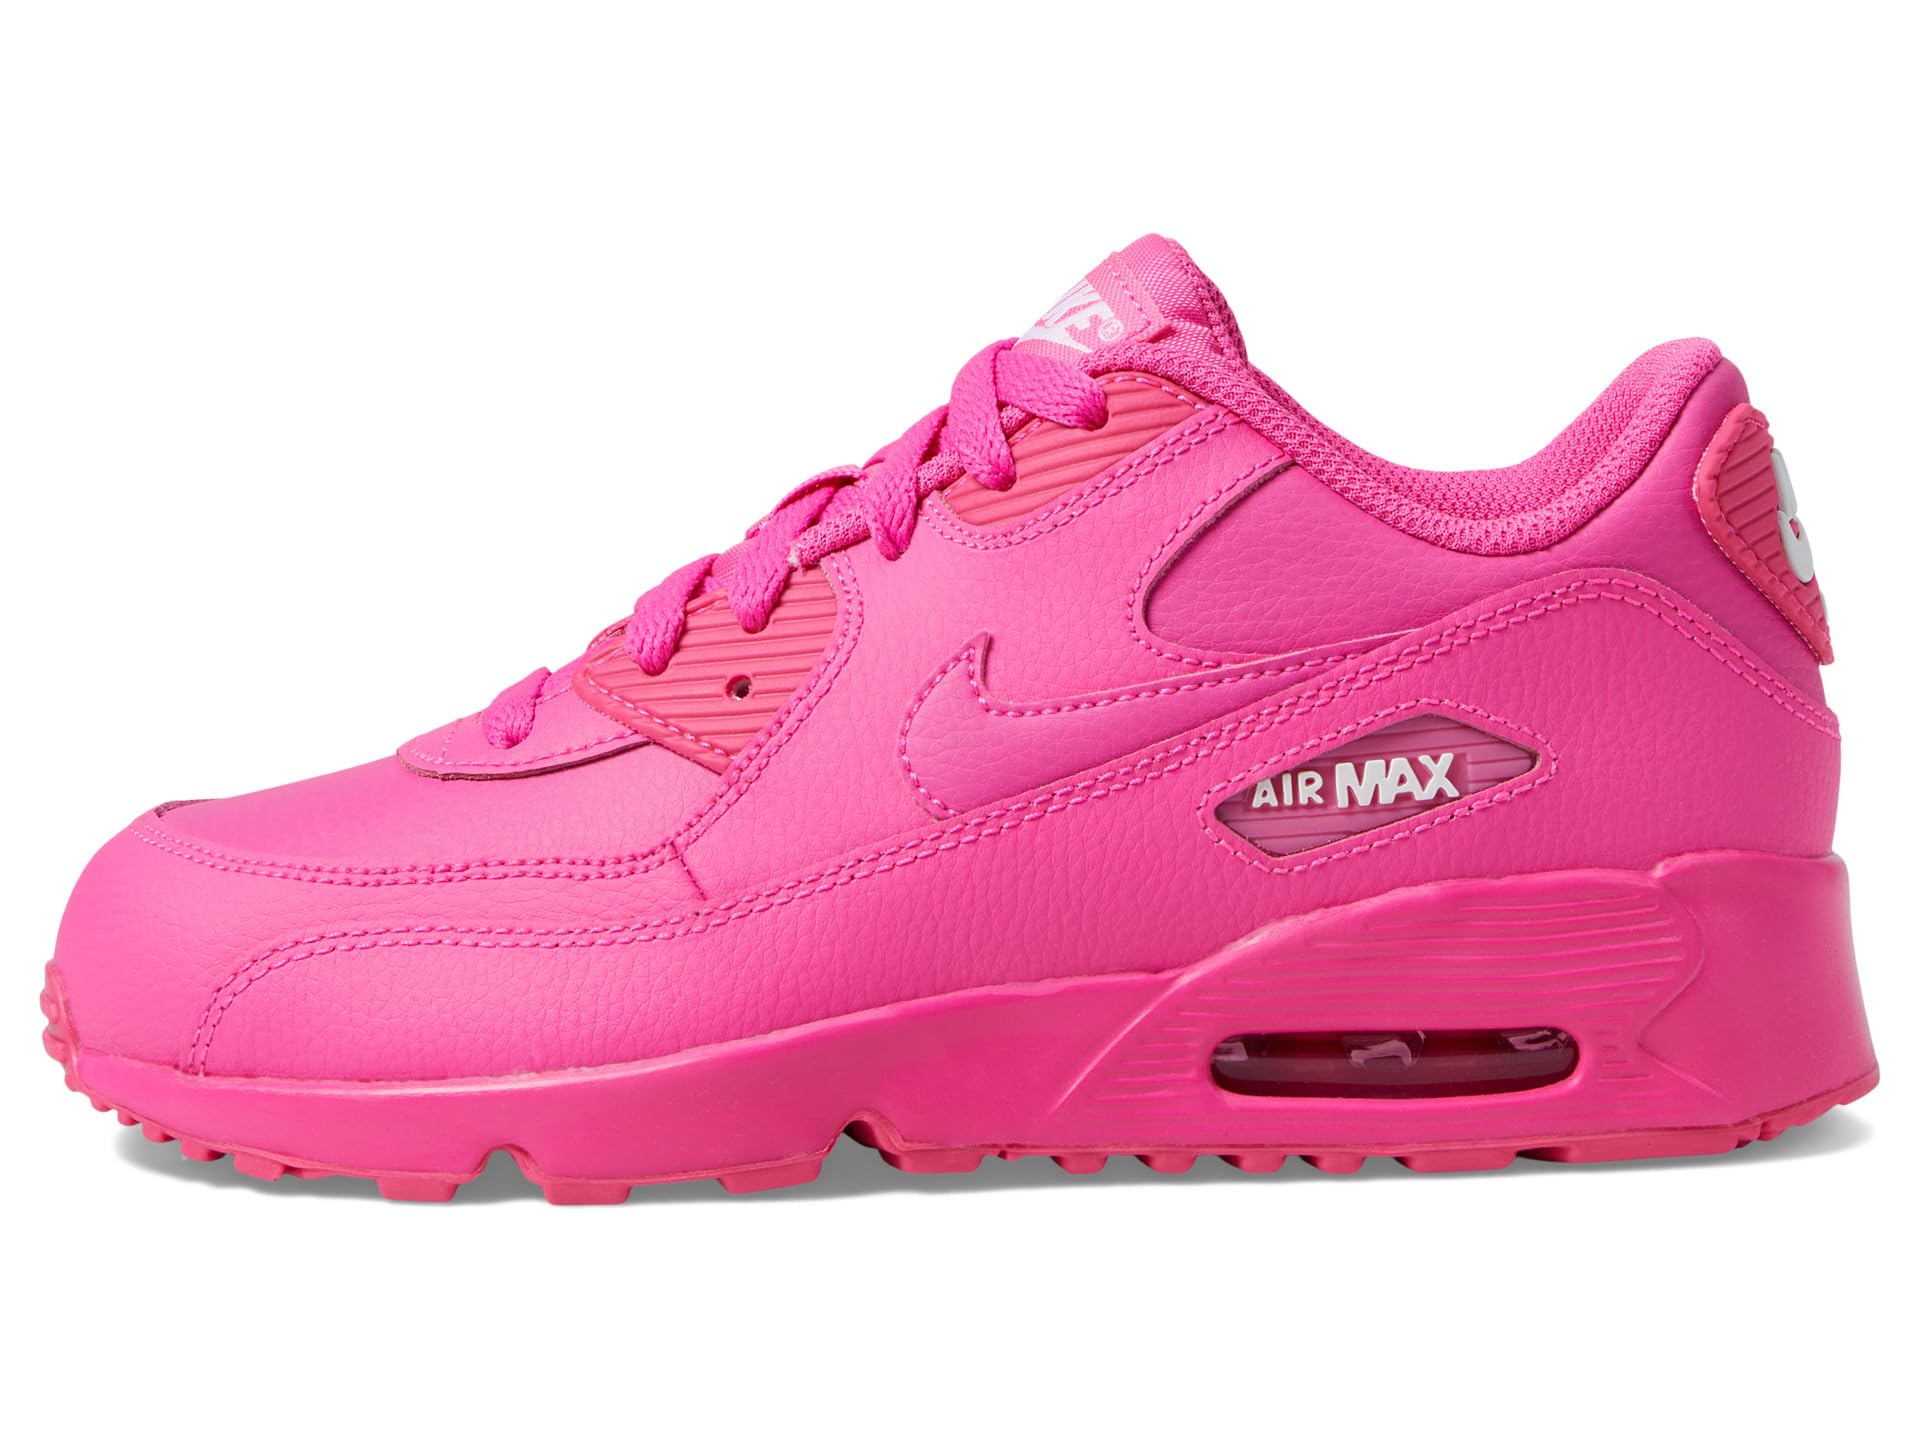 Image 5 of Air Max 90 Leather (Little Kid)